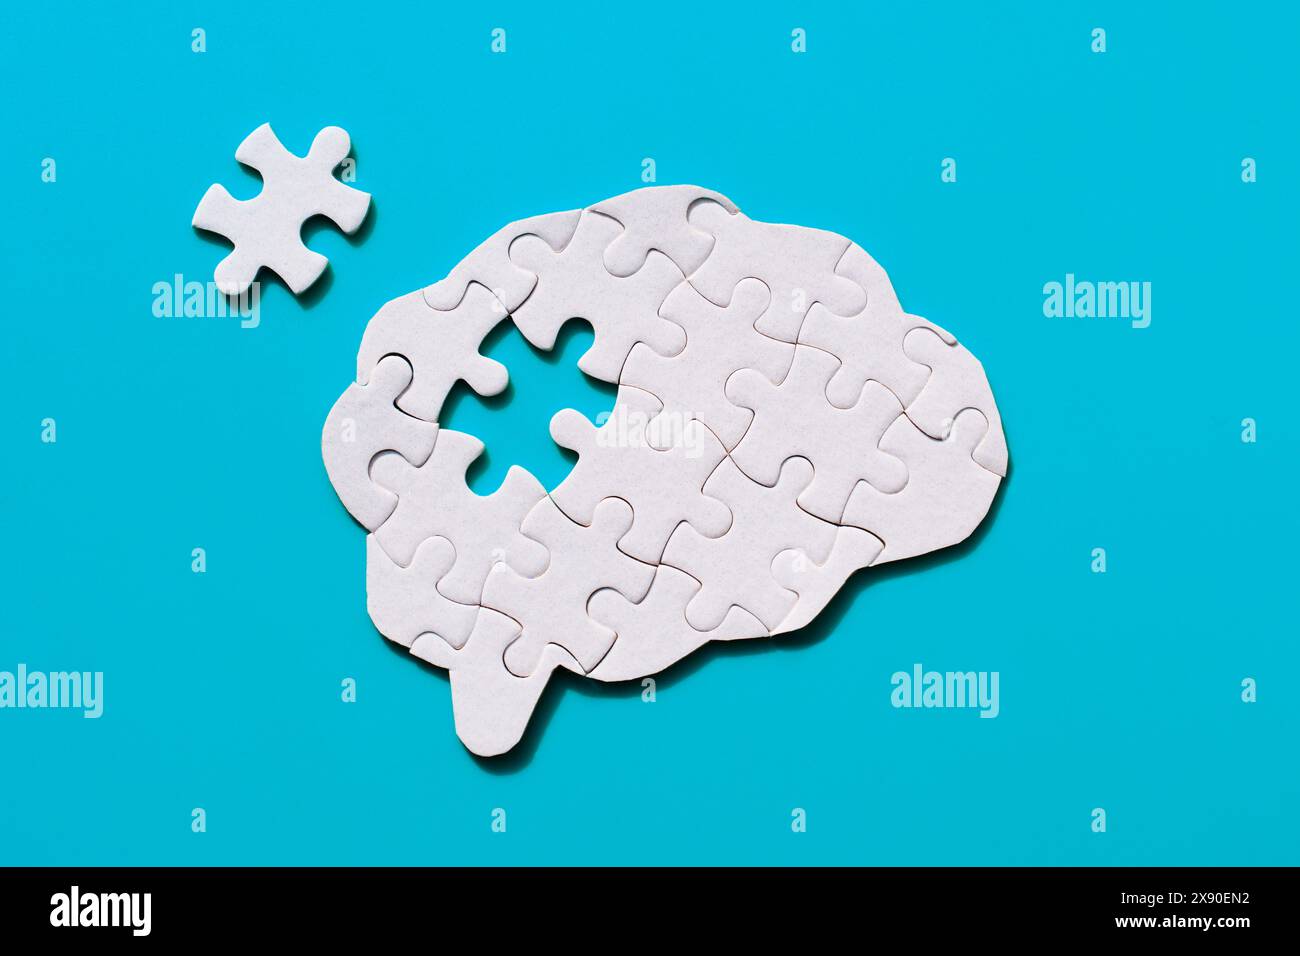 Incomplete jigsaw puzzle in the shape of a brain on a blue background. Acquiring knowledge and forming mind connections. Stock Photo